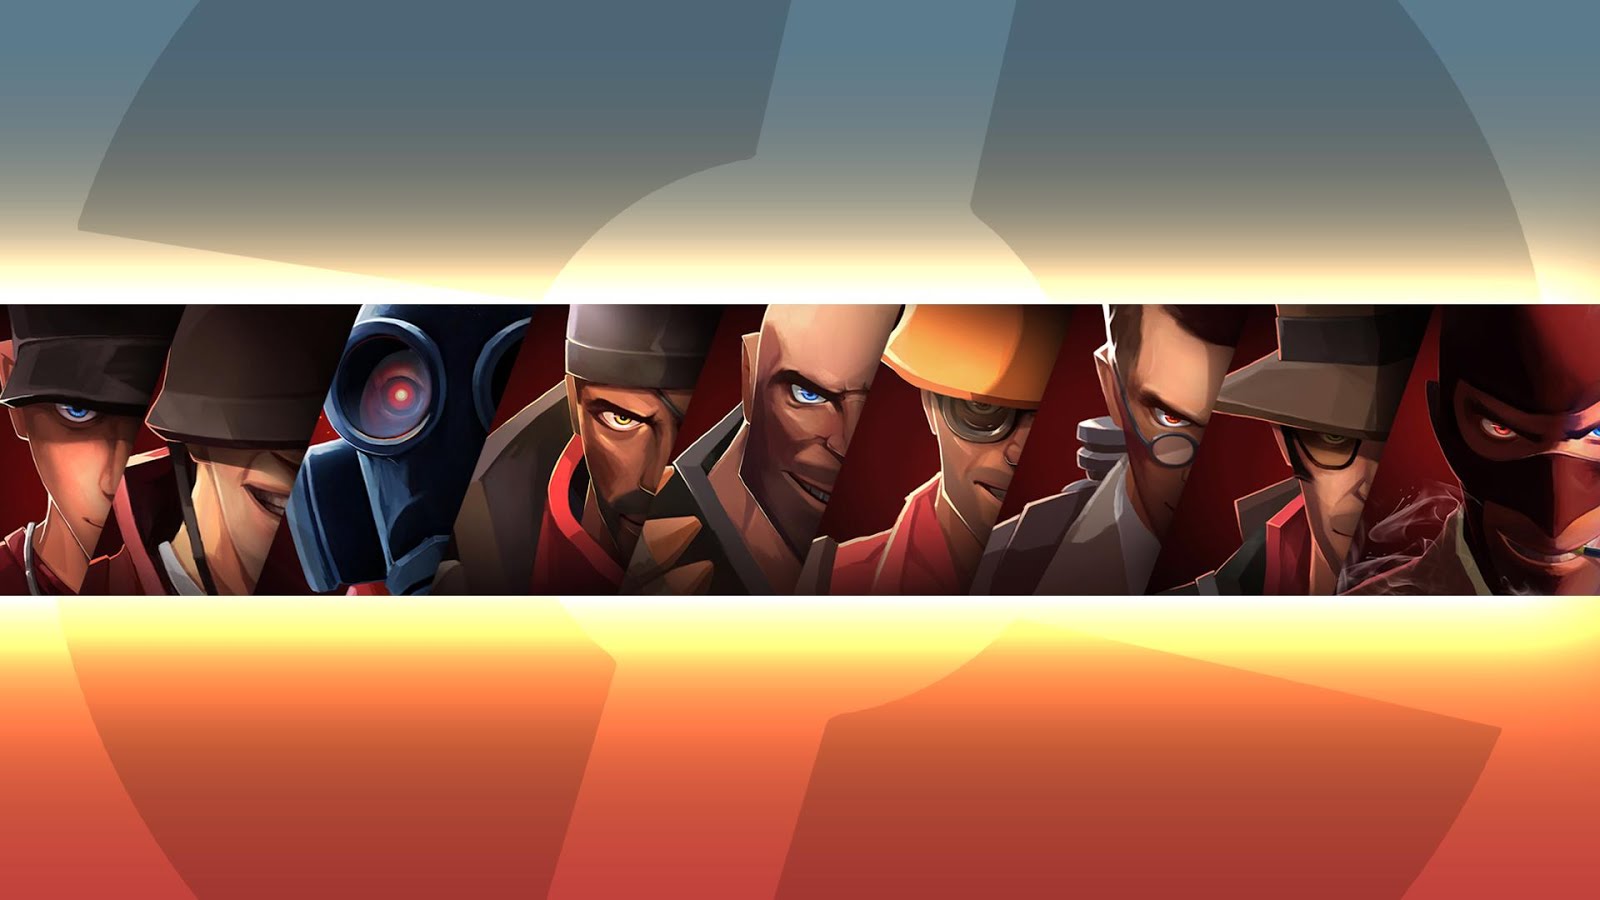 team fortress 2 wiki items